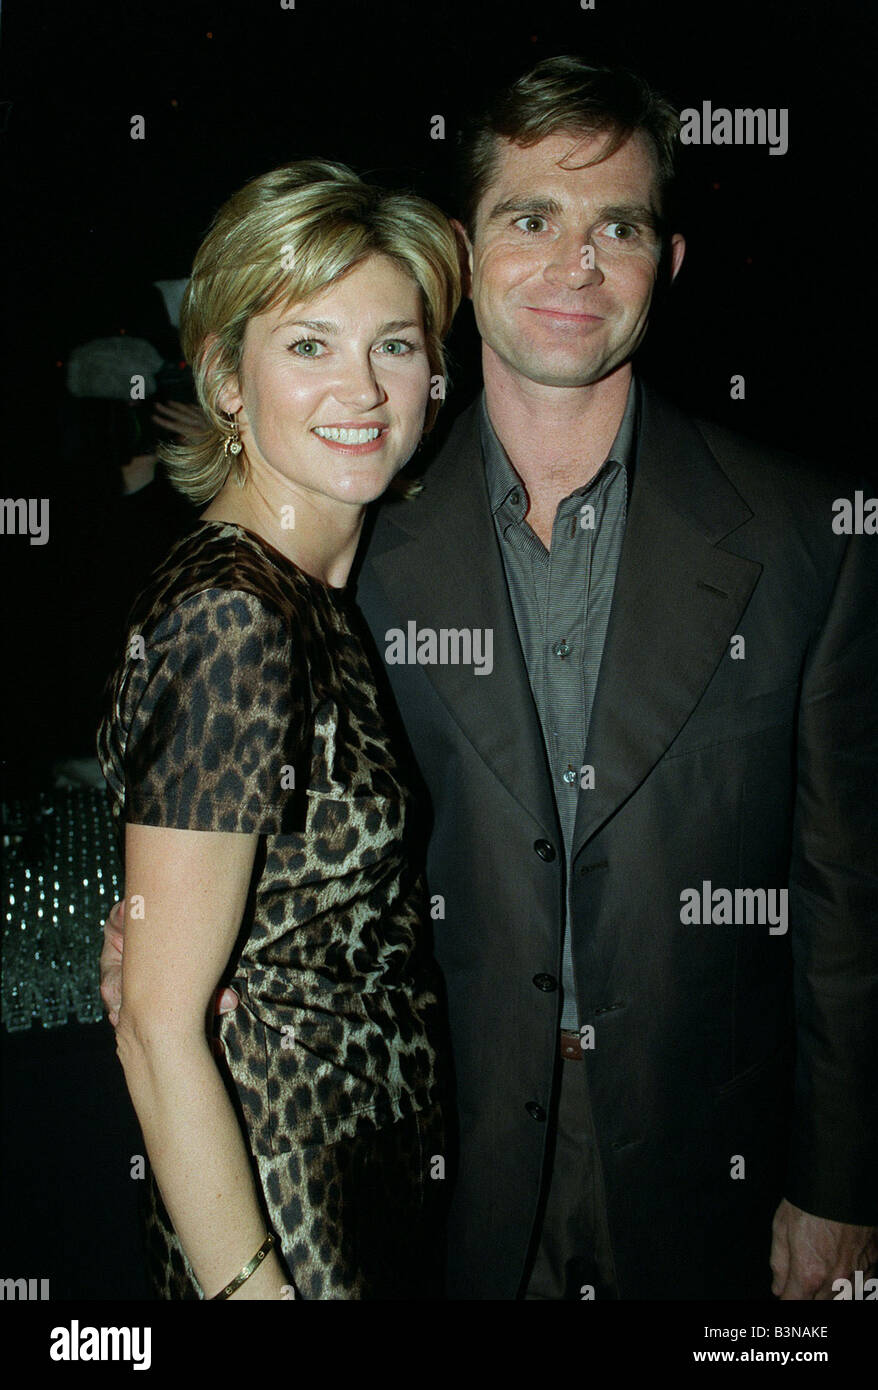 Anthea Turner TV Moderatorin März mit ihrem geliebten Grant Bovey bei Lord Of The Dance after-Show party Stockfoto